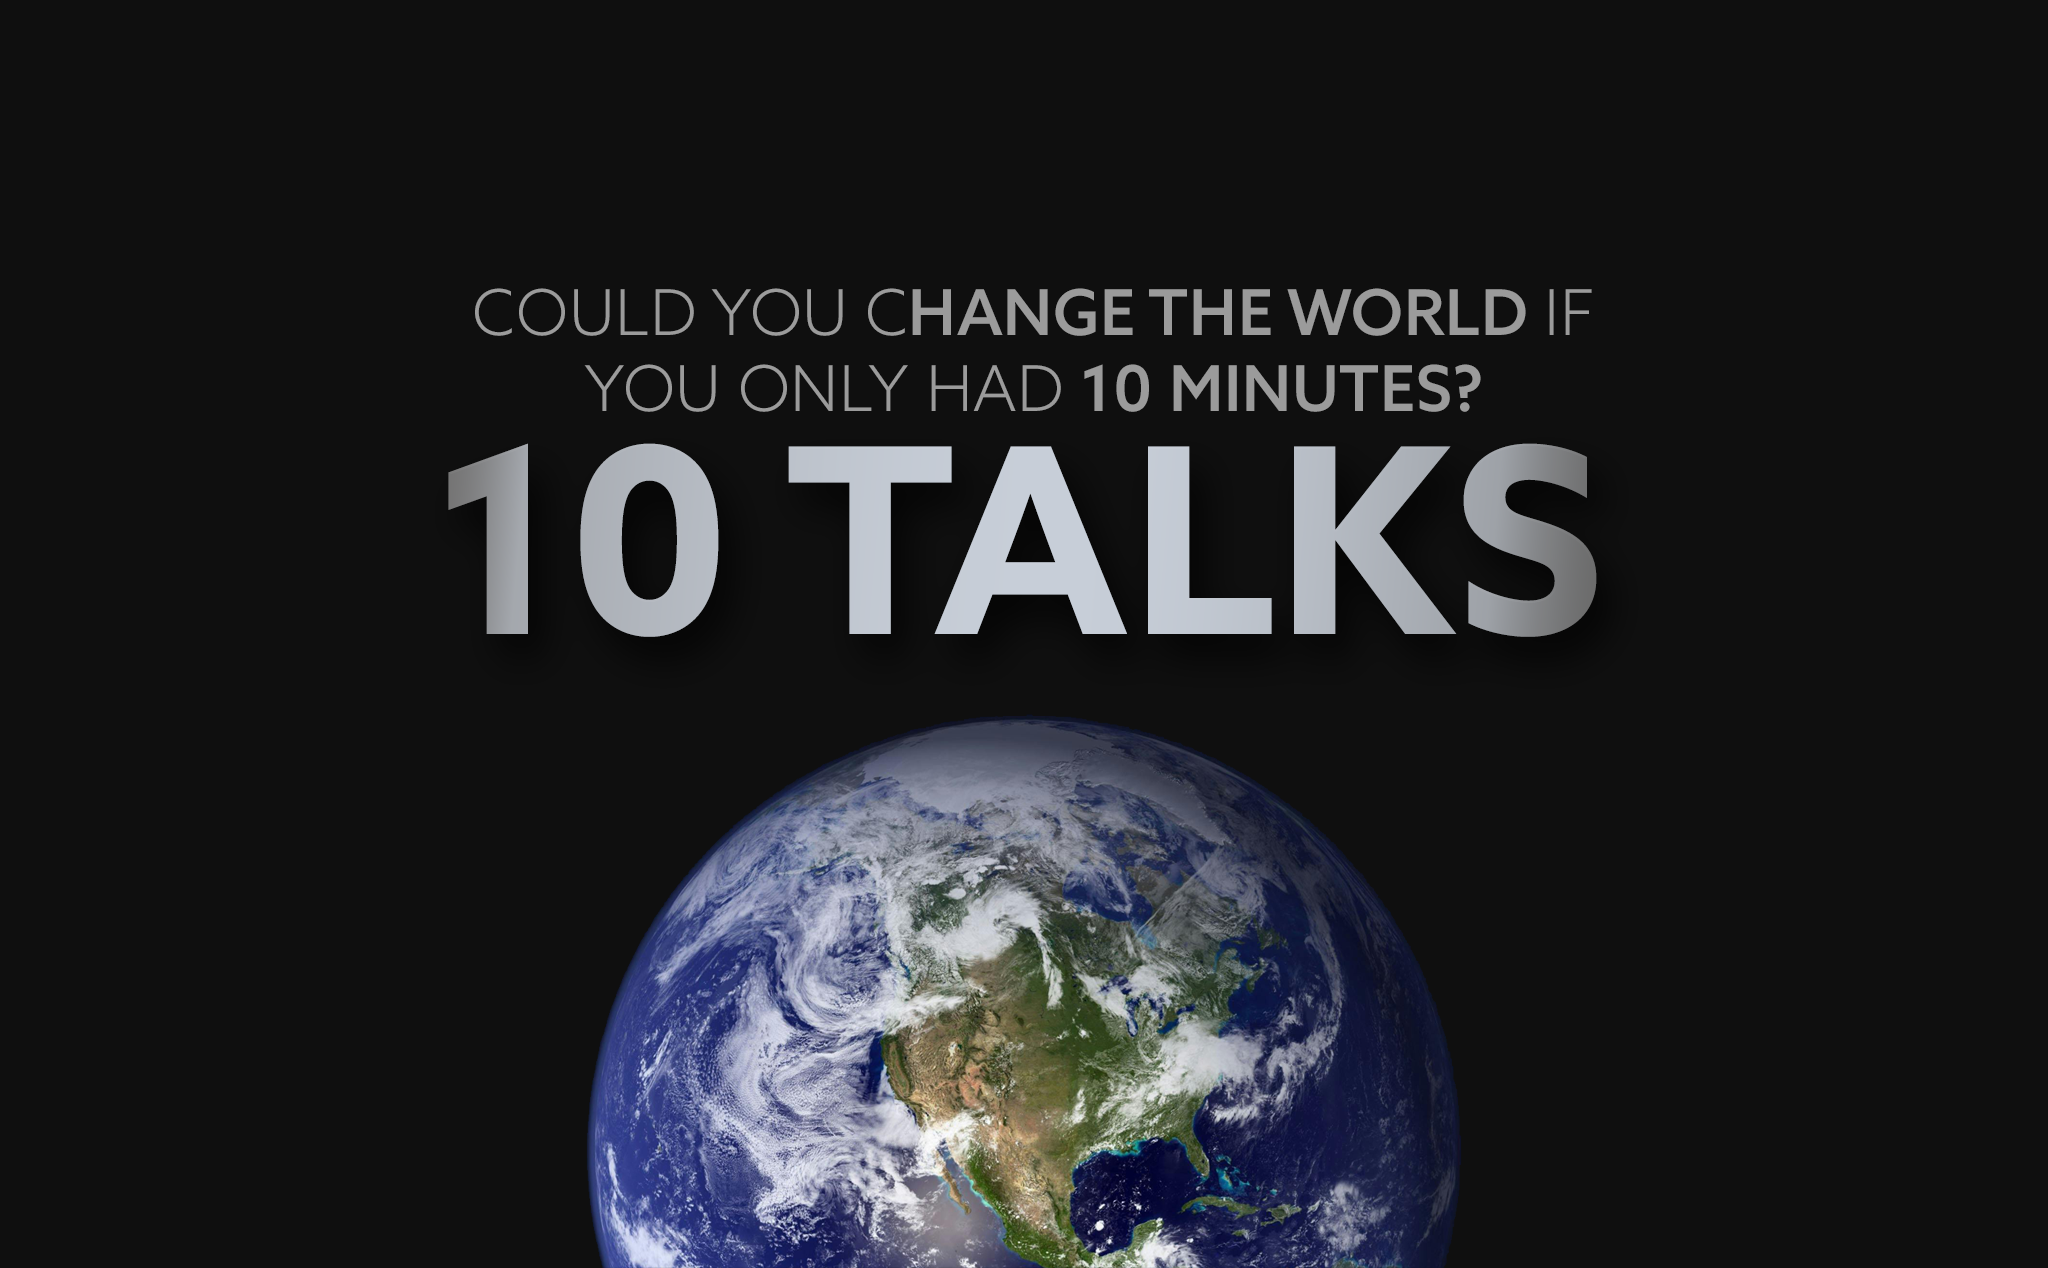 Could you change the world if you only had 10 minutes? 10 Talks